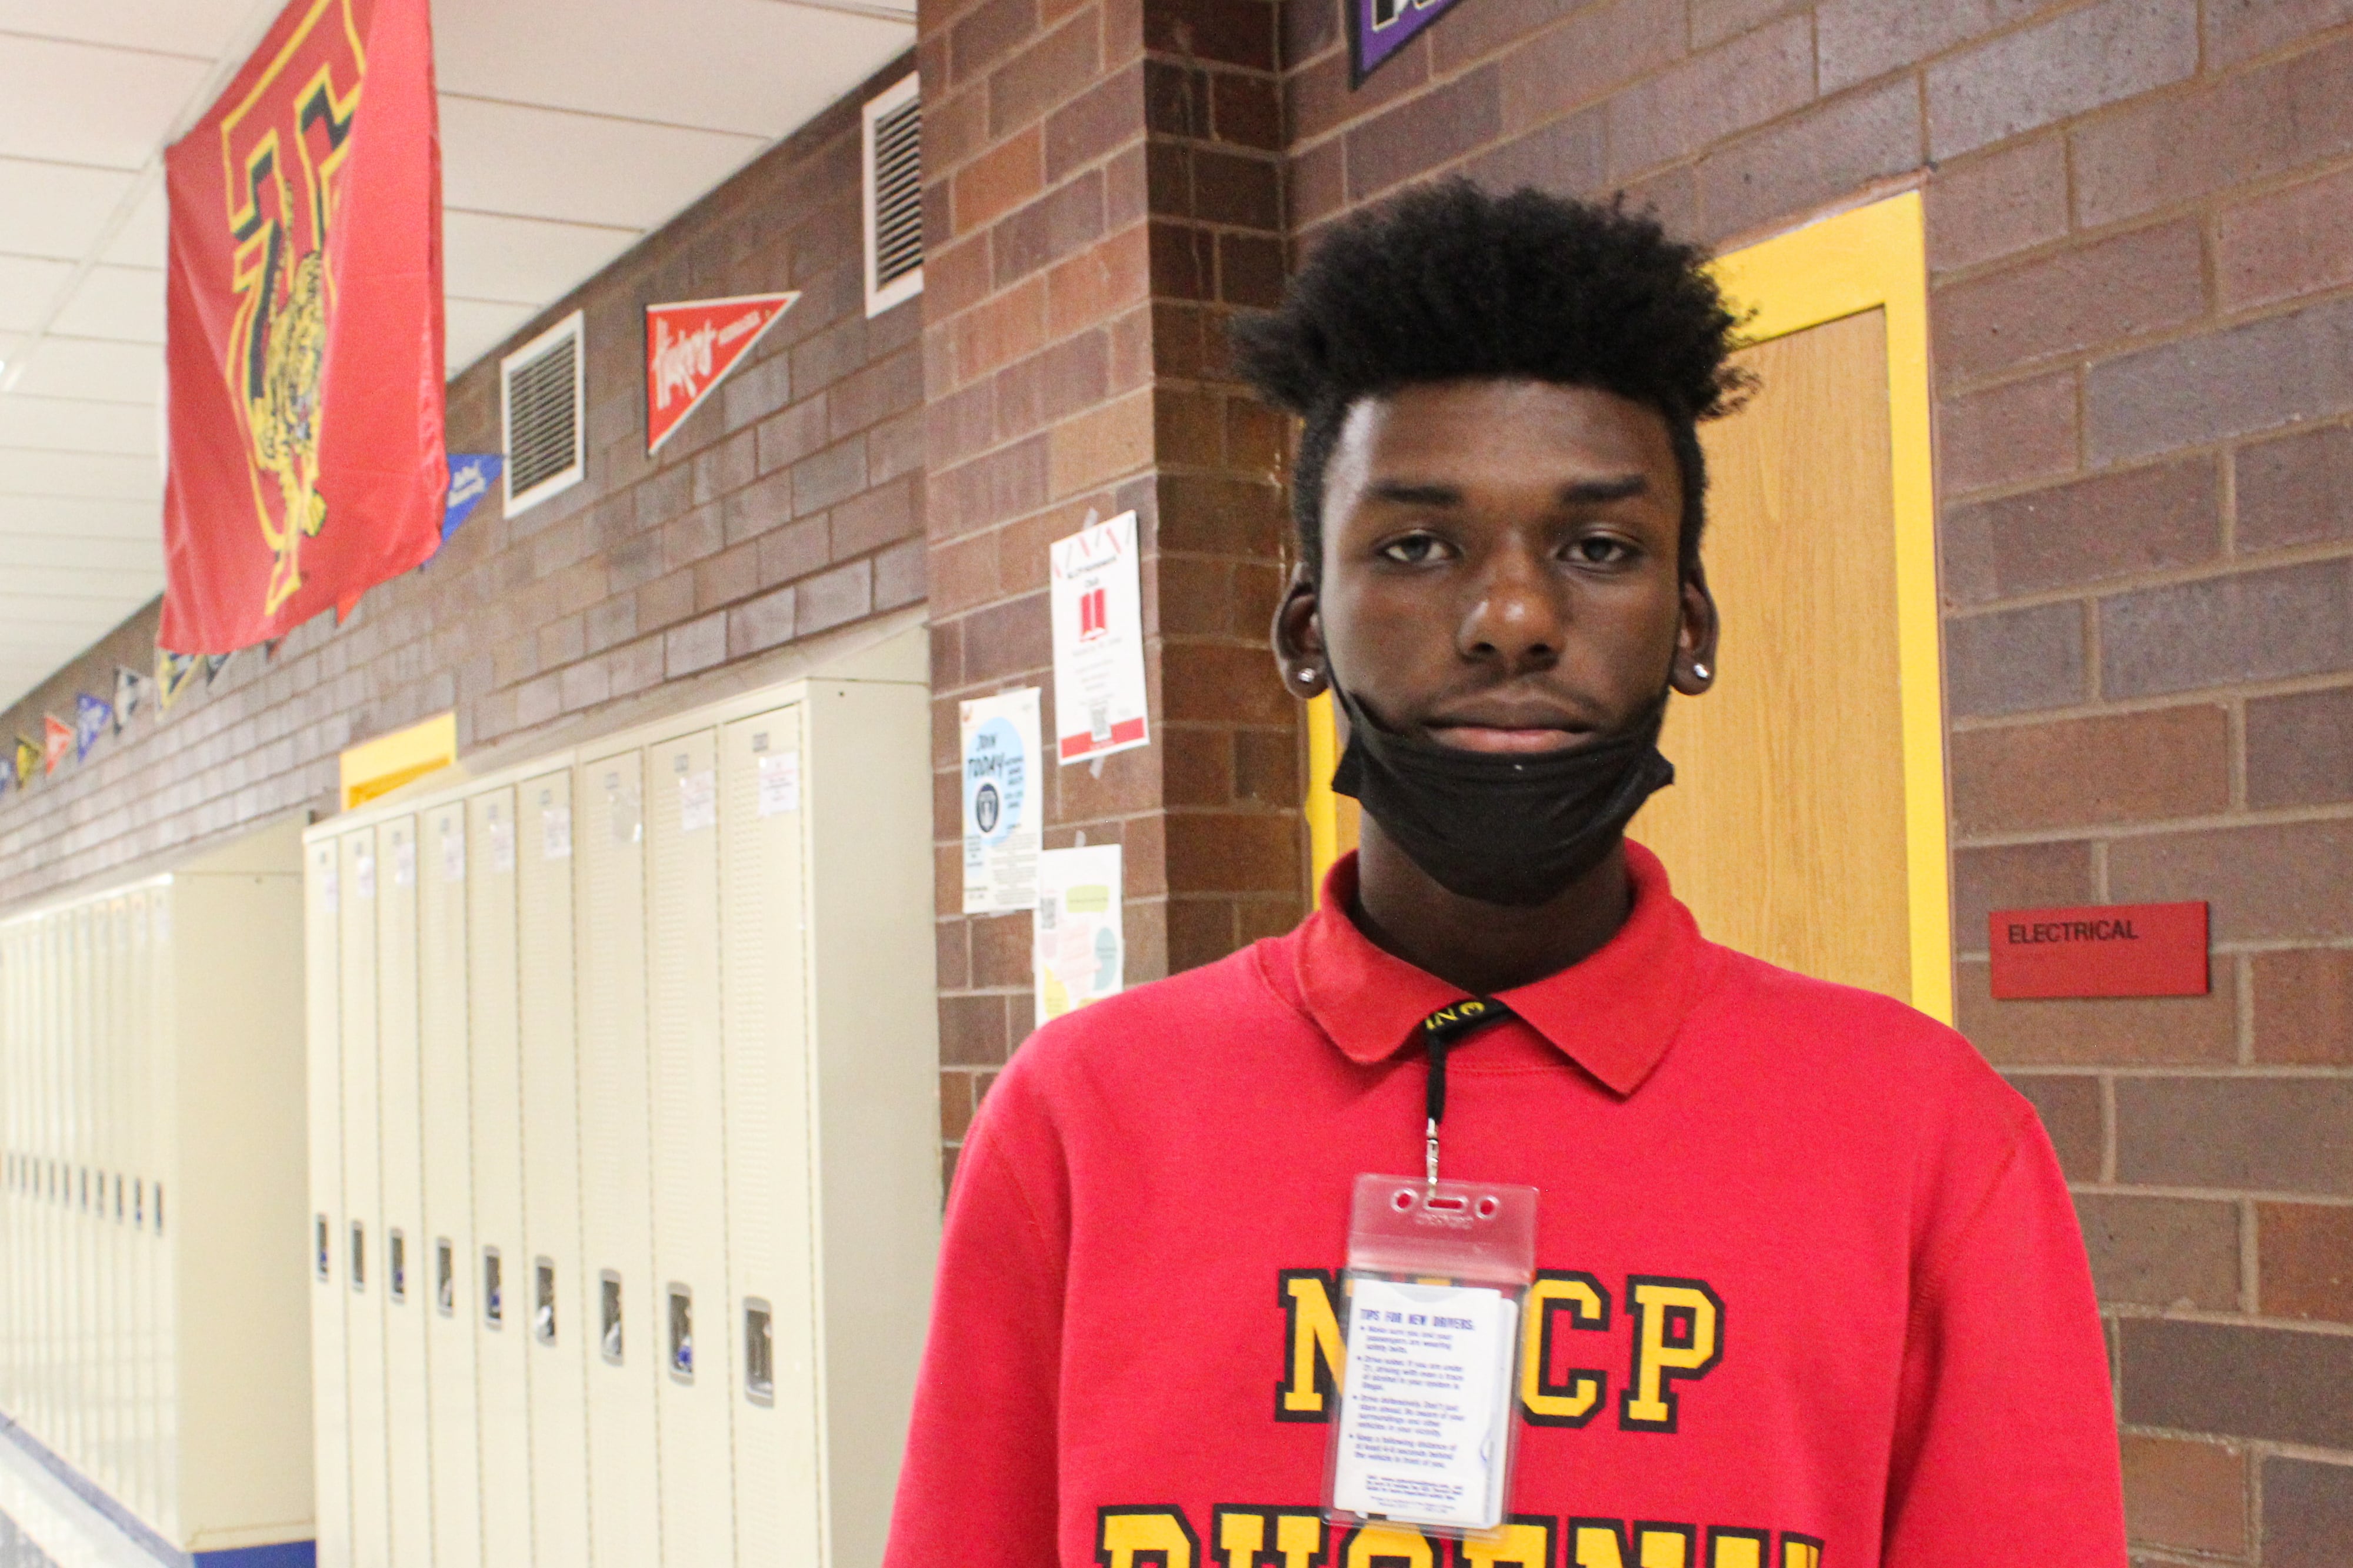 DeMarcus Thompson, 17, joined the Peace Warriors at North Lawndale College Prep about two years ago to curb fights at his school.